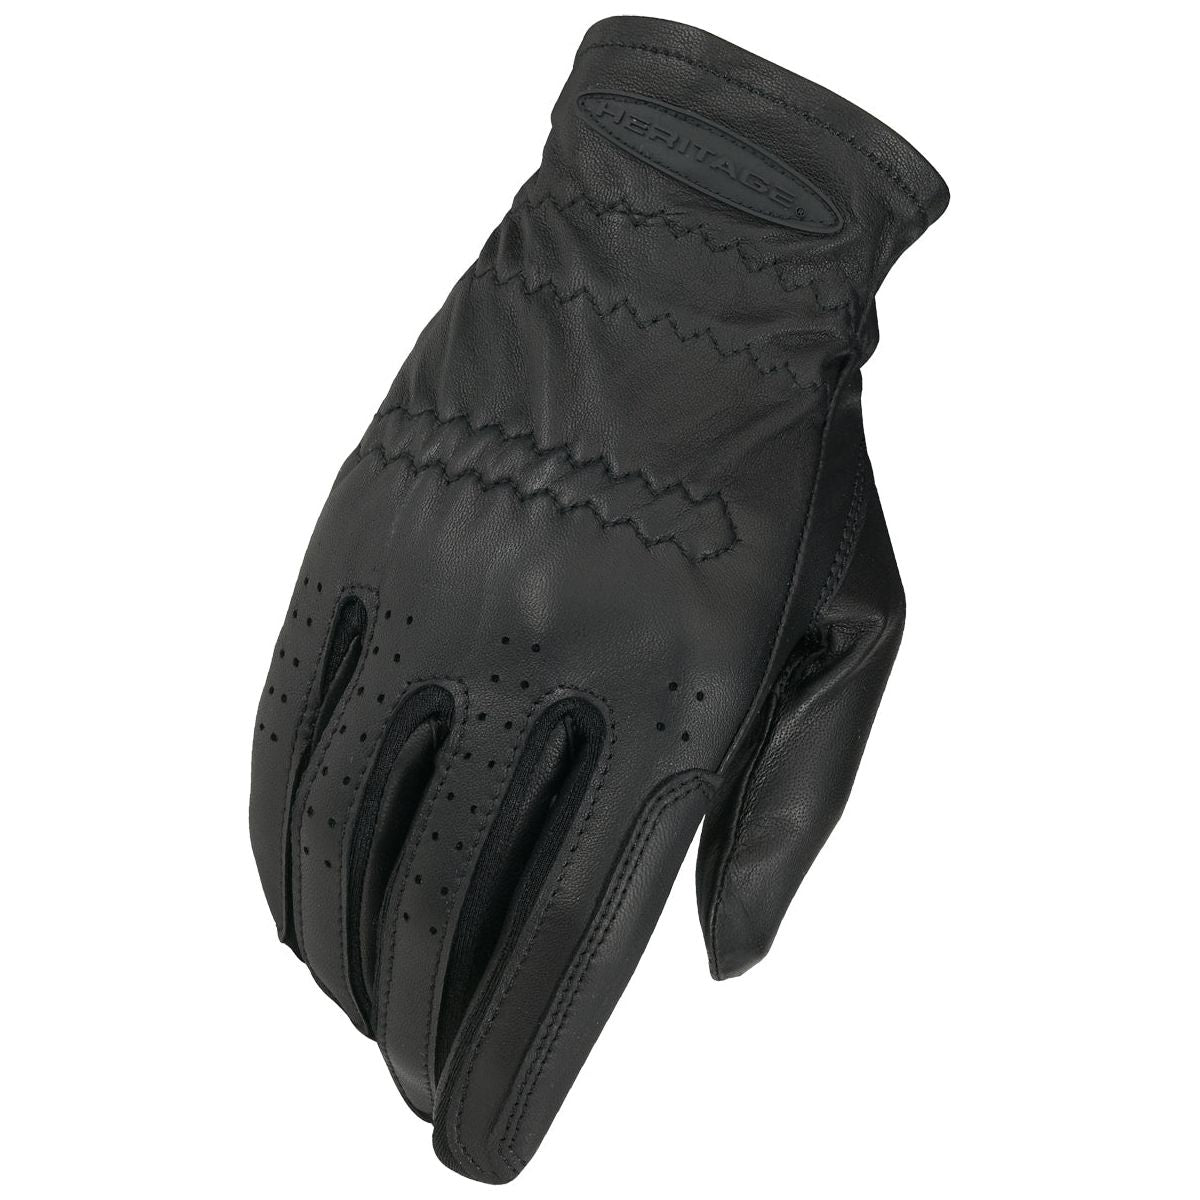 Heritage Gloves Pro-Fit Show Glove